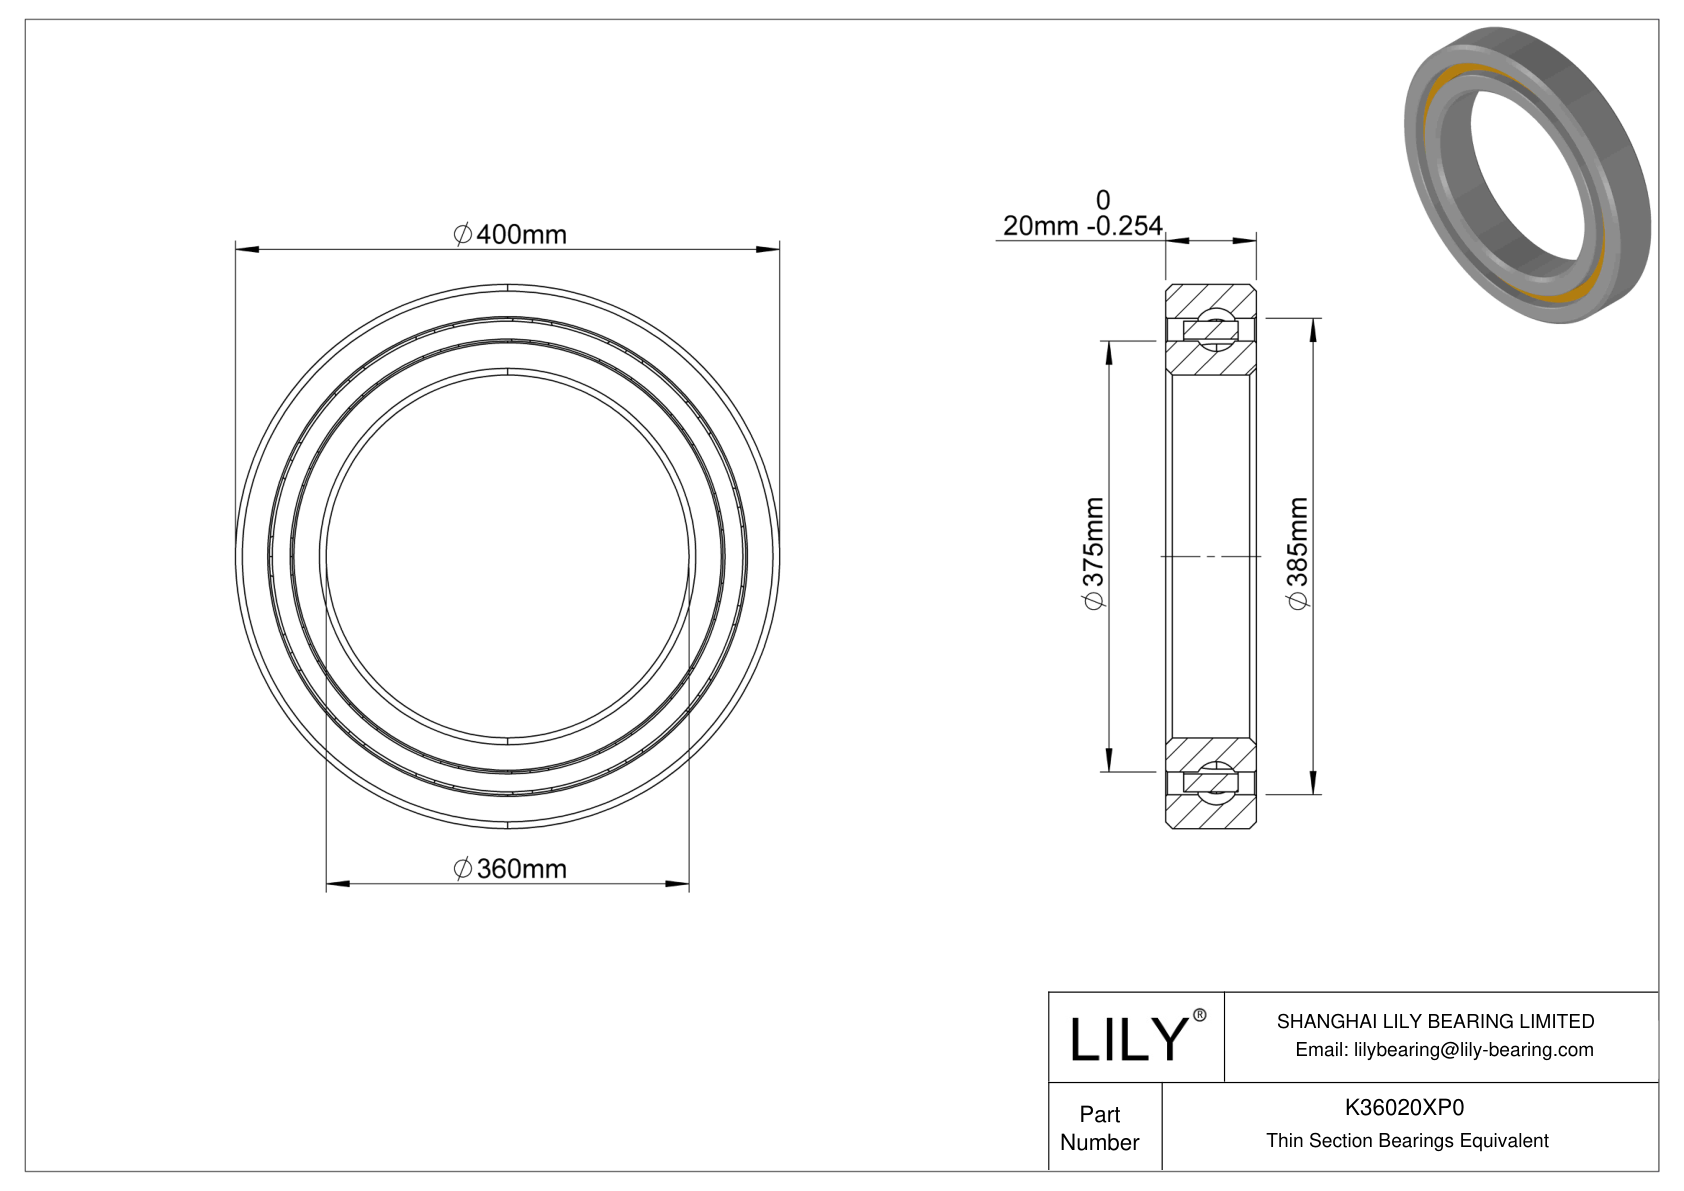 K36020XP0 Constant Section (CS) Bearings cad drawing